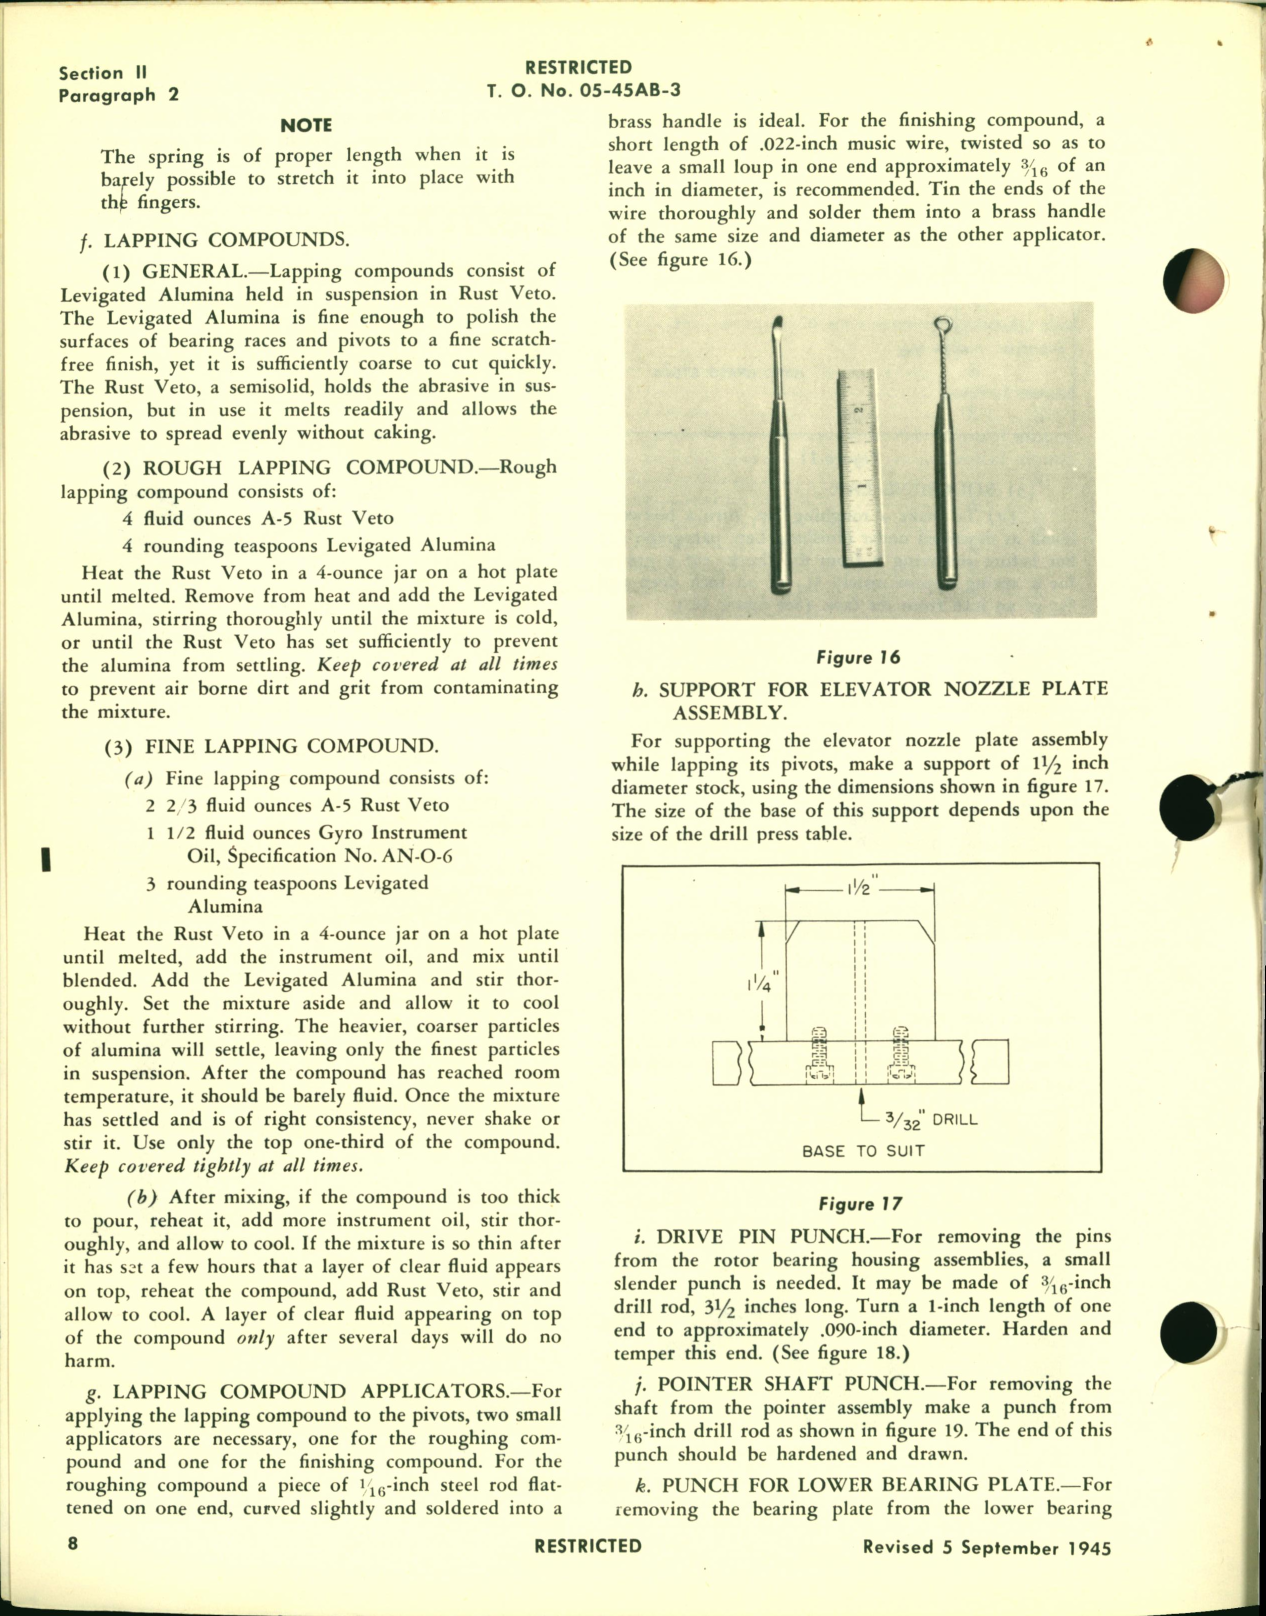 Sample page 10 from AirCorps Library document: Overhaul Instructions for Automatic Pilot Type A-3